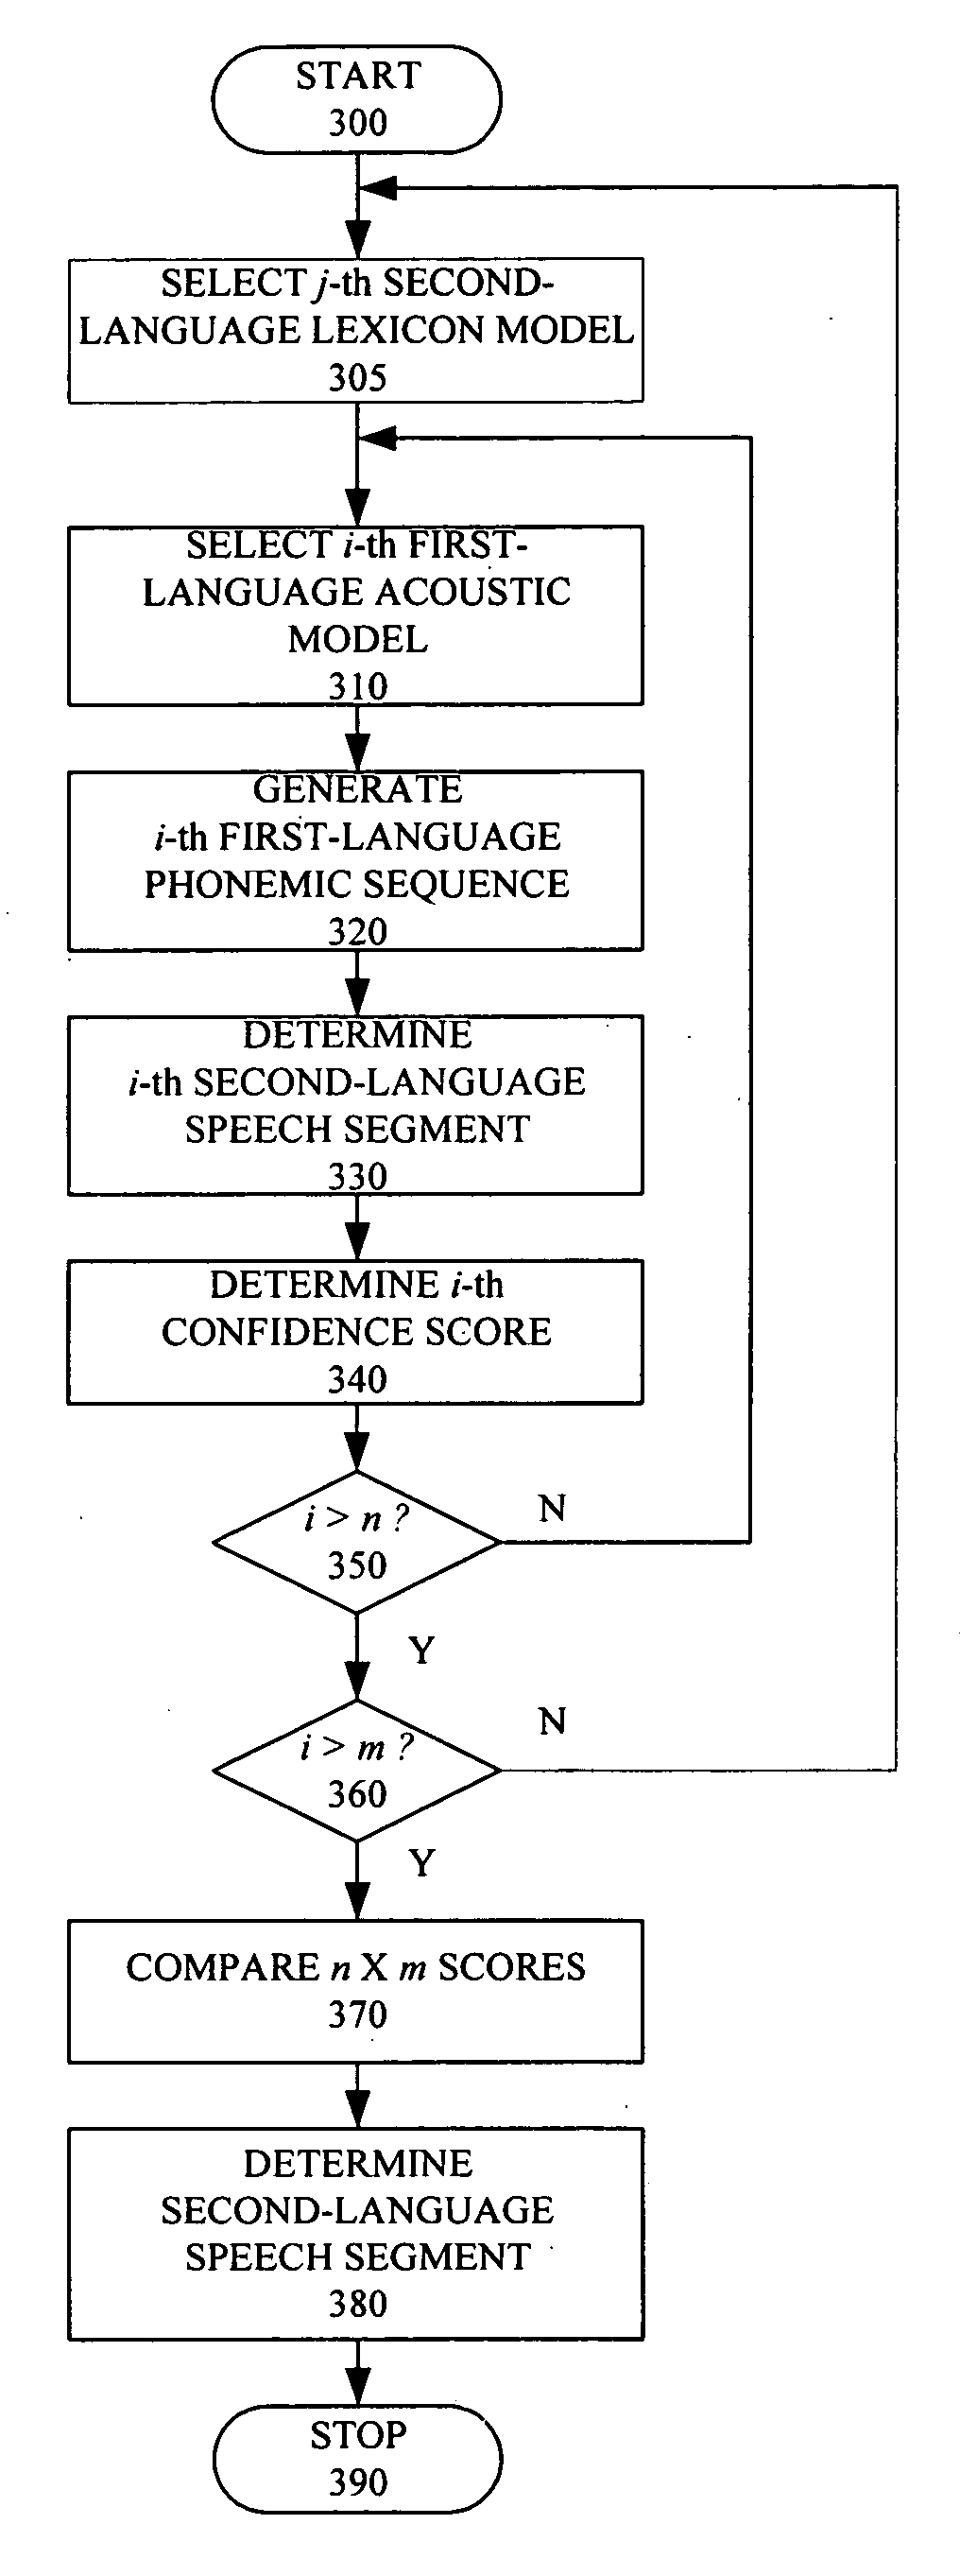 System and method of speech recognition for non-native speakers of a language